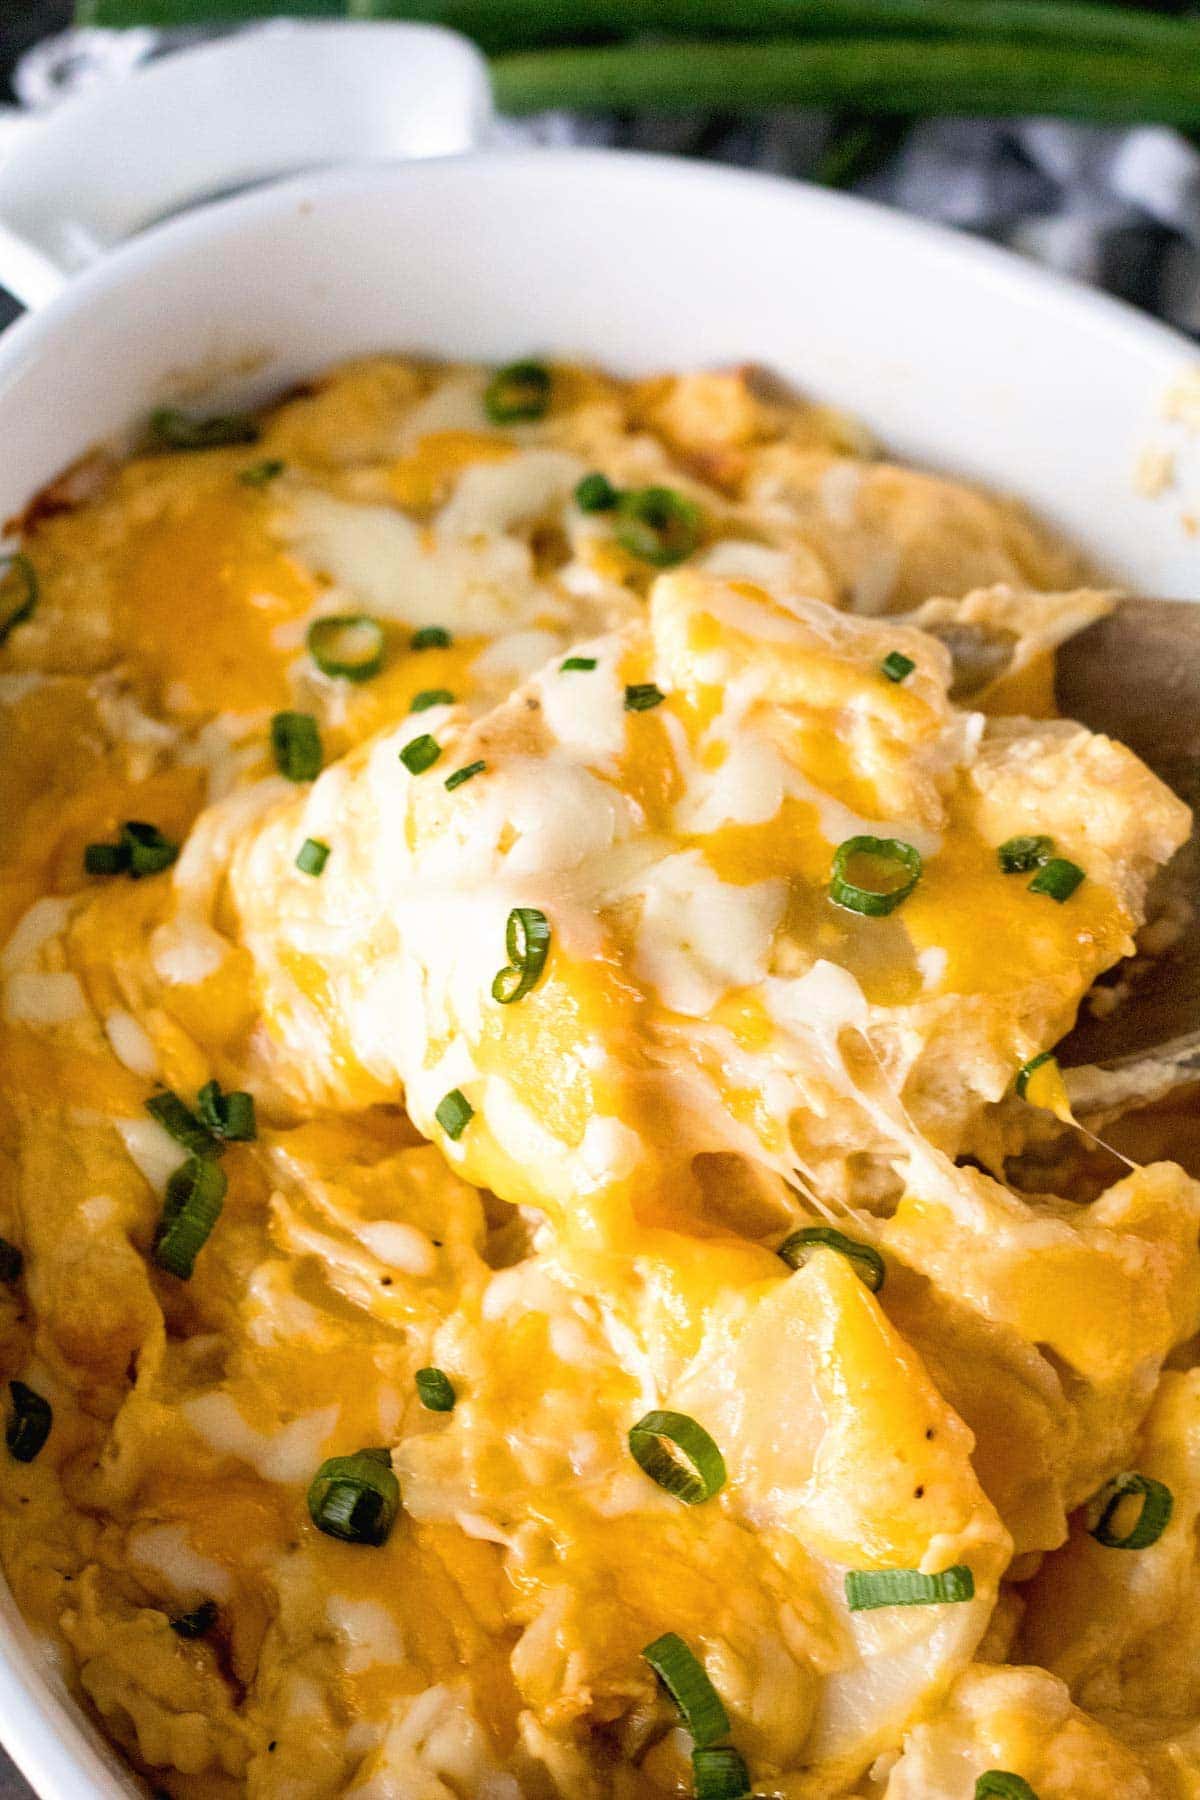 Cheesy Homemade Scalloped Poatoes Recipe is Perfect for Dinner!